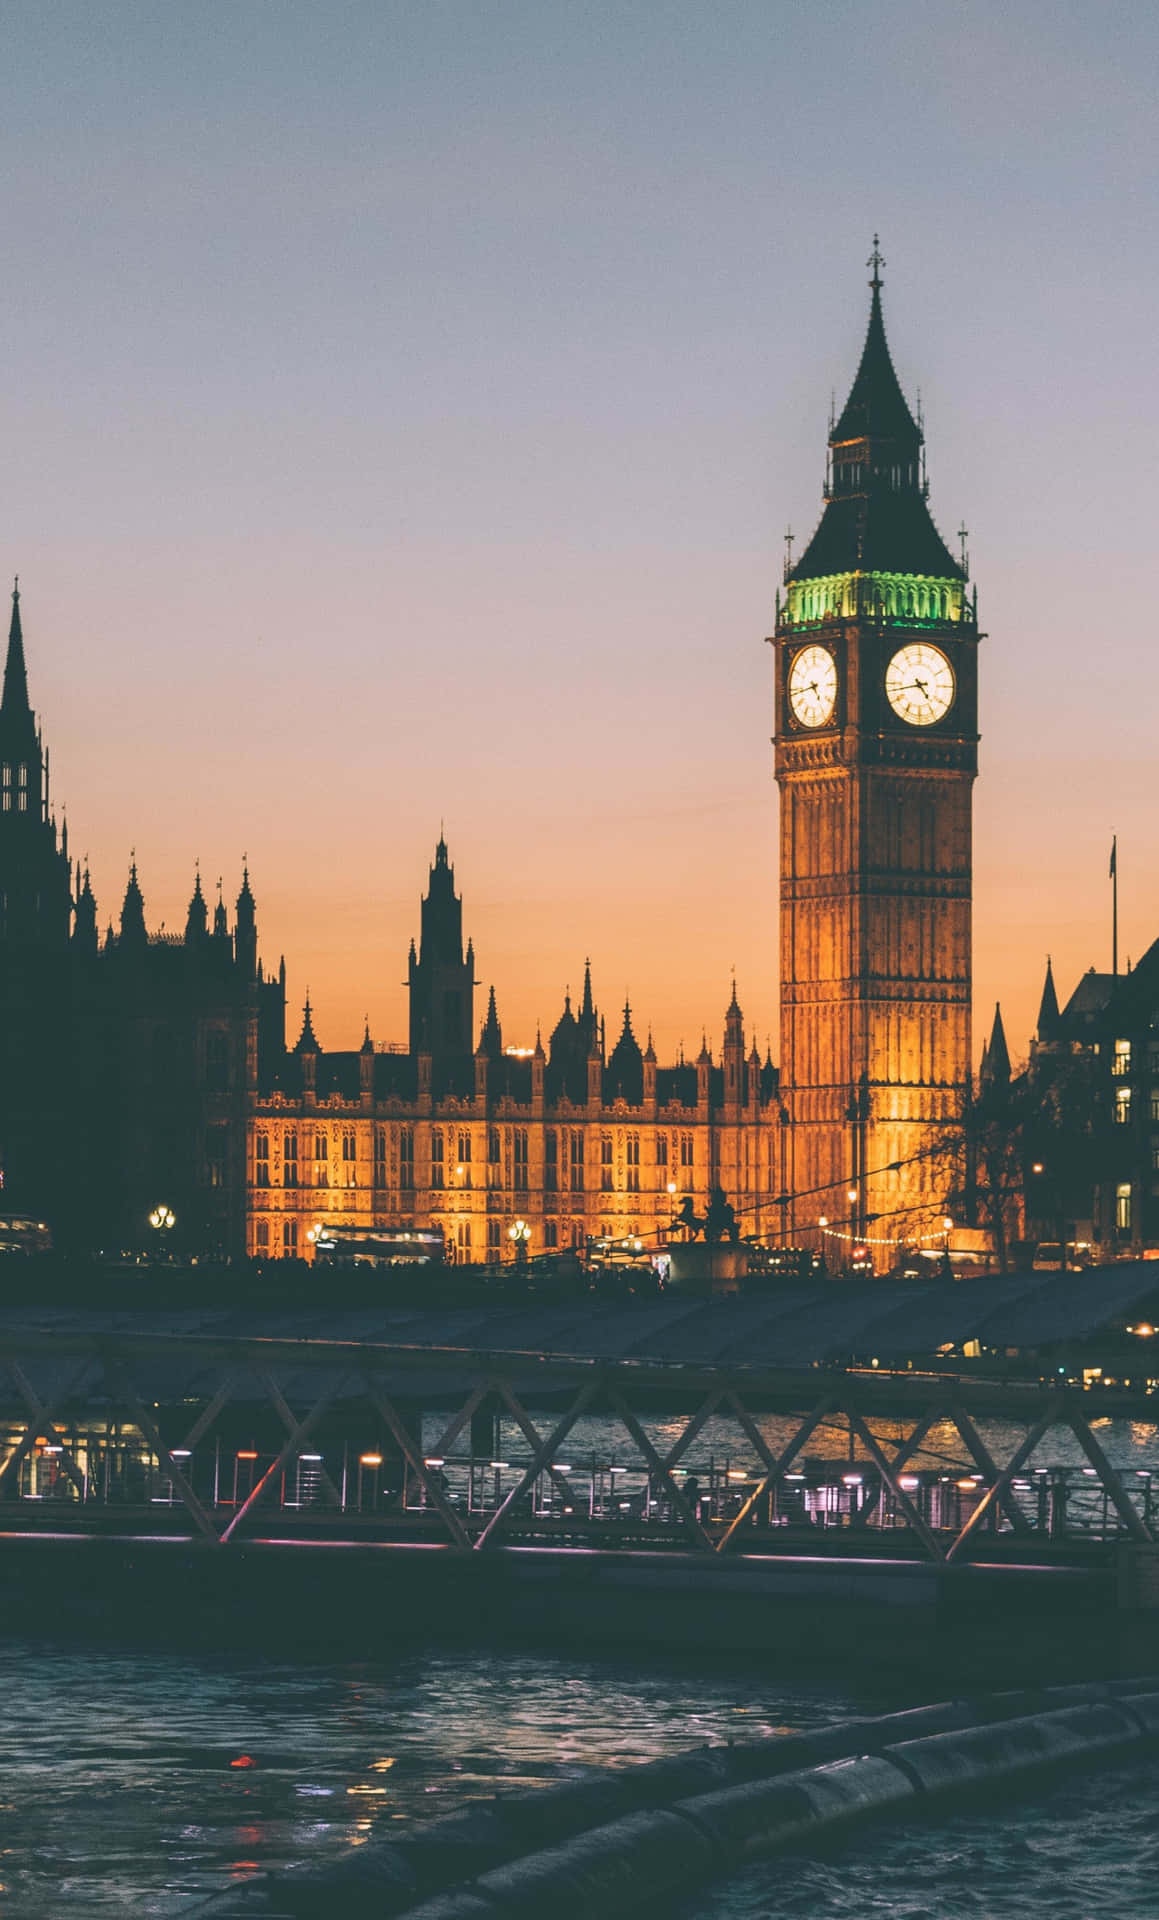 Explore the exciting skyline of London with your iPhone Wallpaper